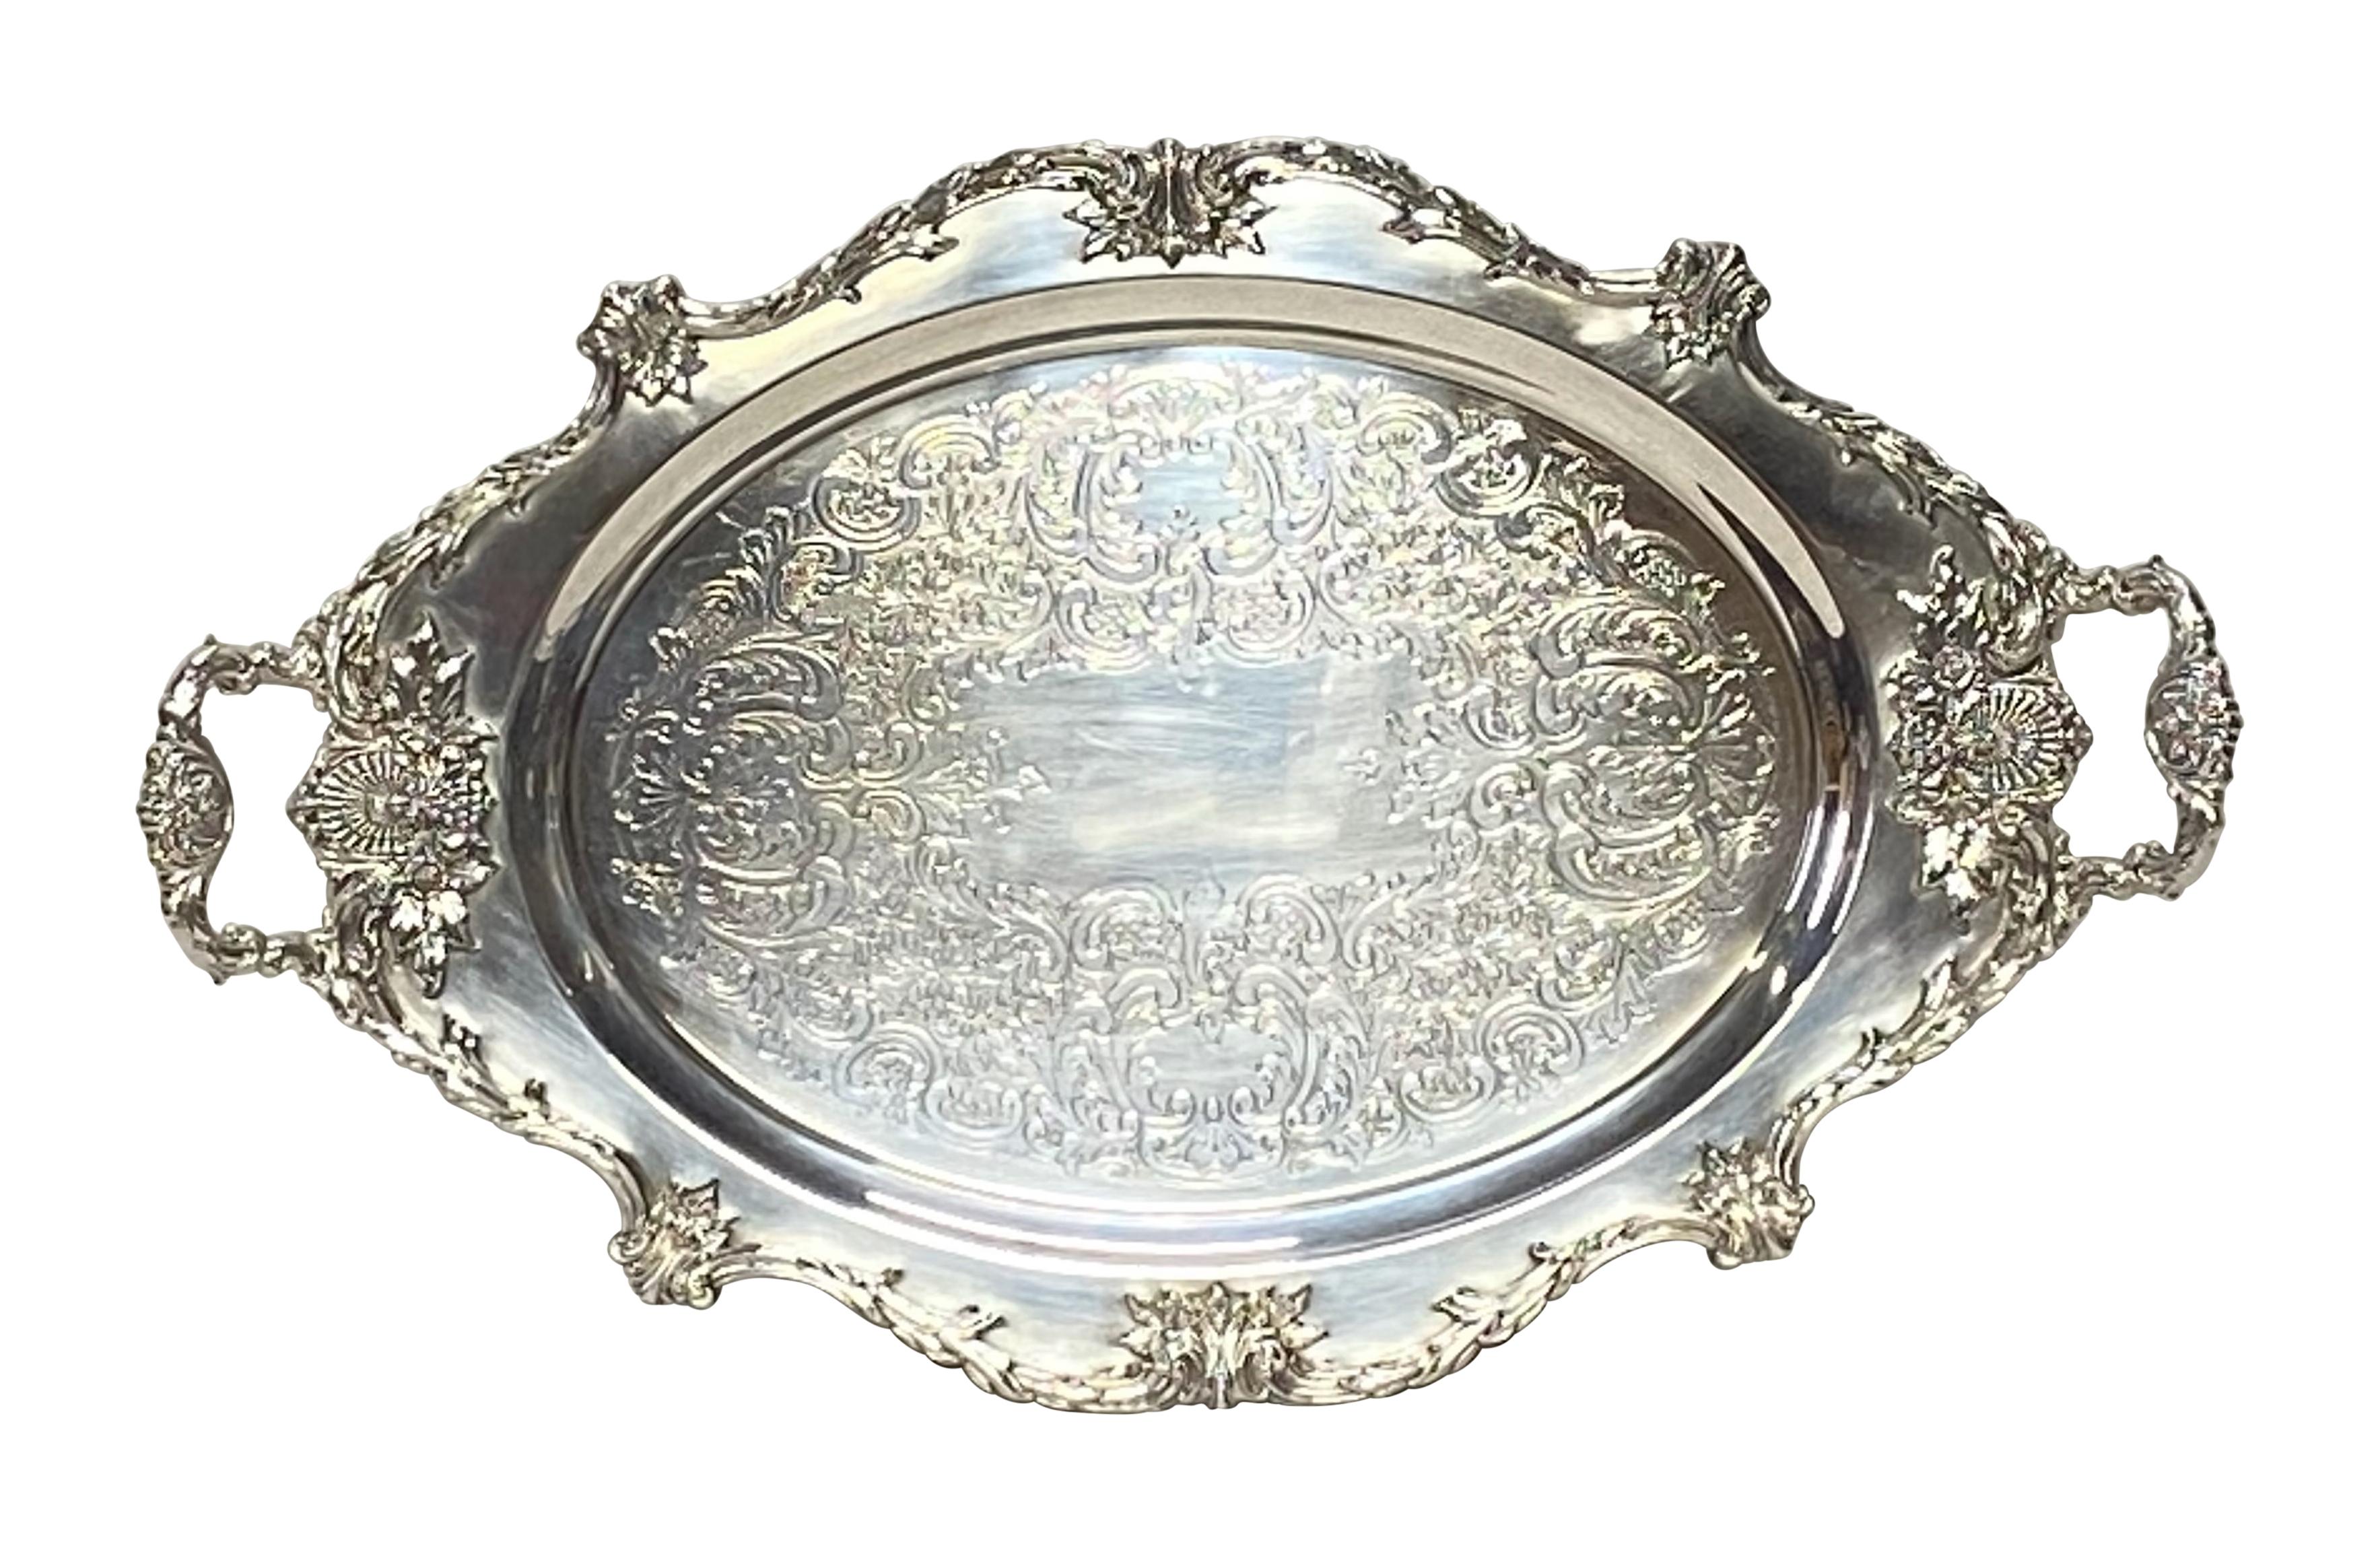 A large Classic style two handled and footed silver plate serving tray, marked Christopher Wren by Wallace.
American, mid-20th century.
In excellent condition.



